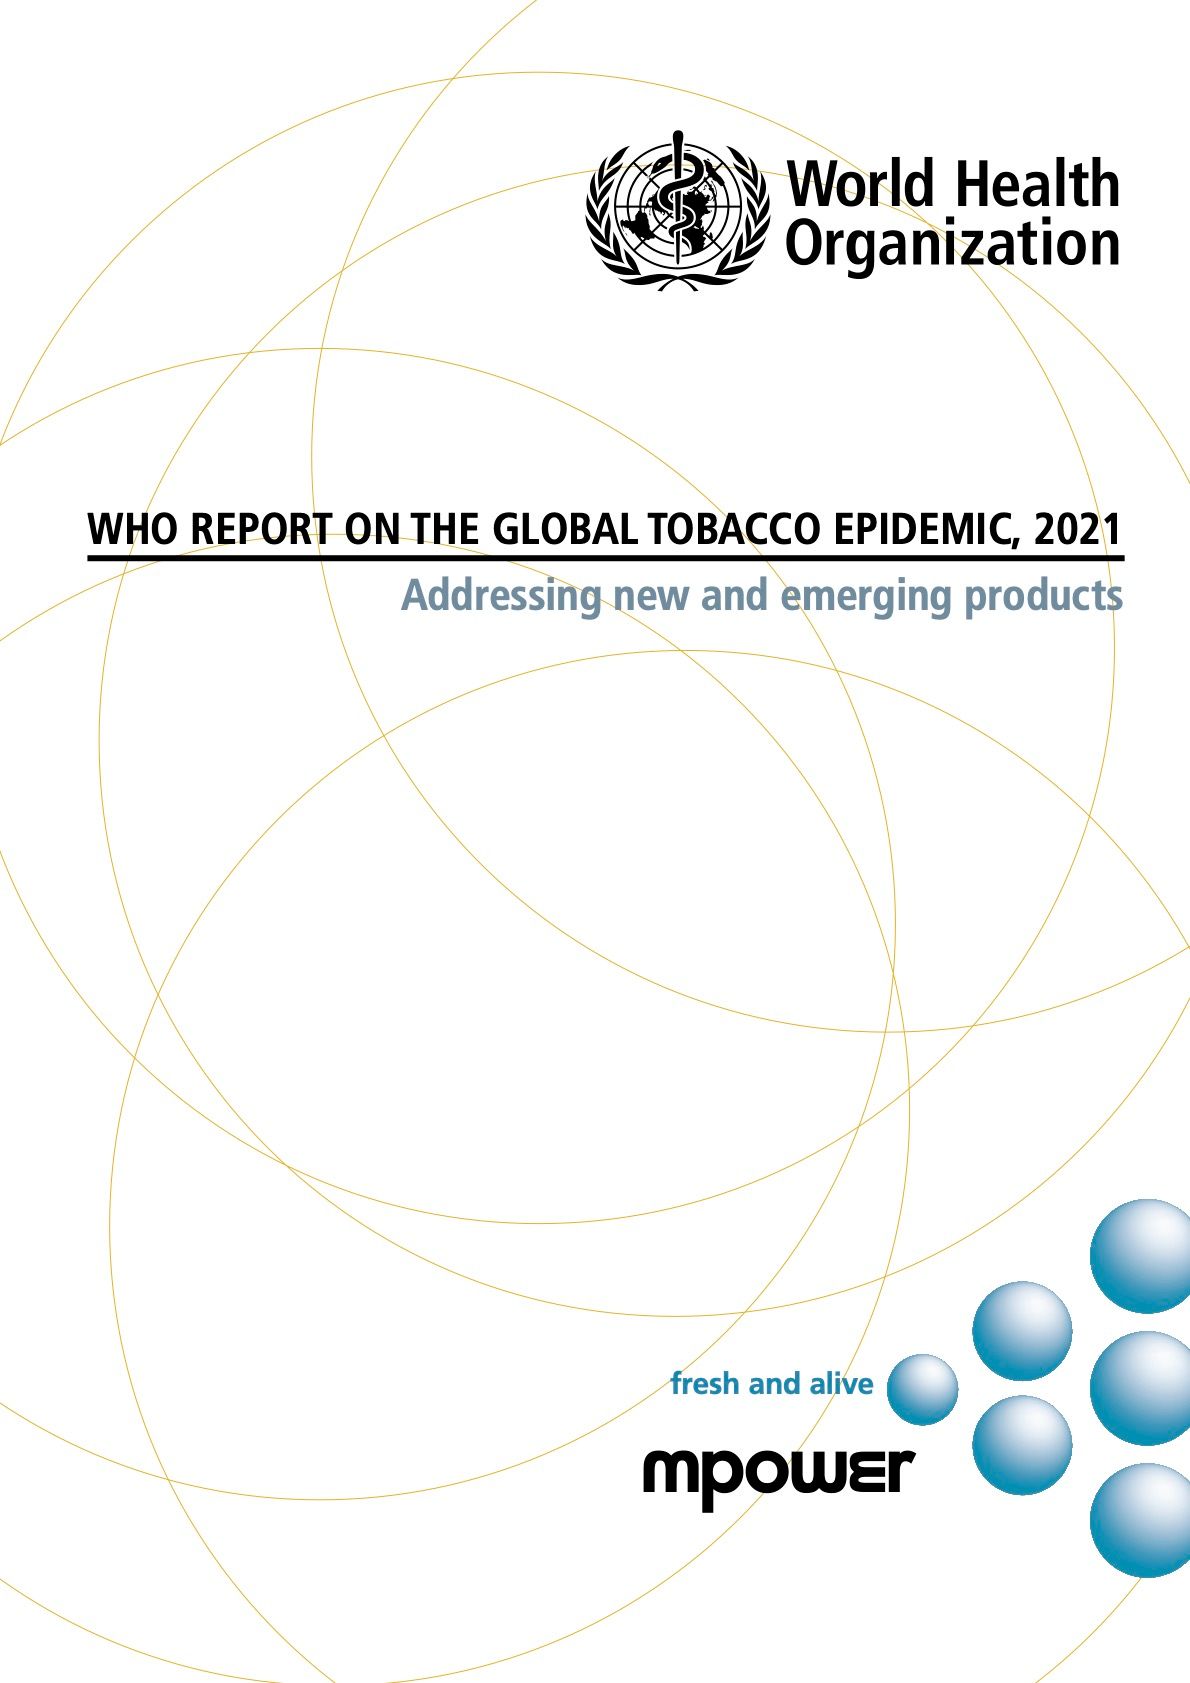 WHO Report on the Global Tobacco Epidemic, 2021